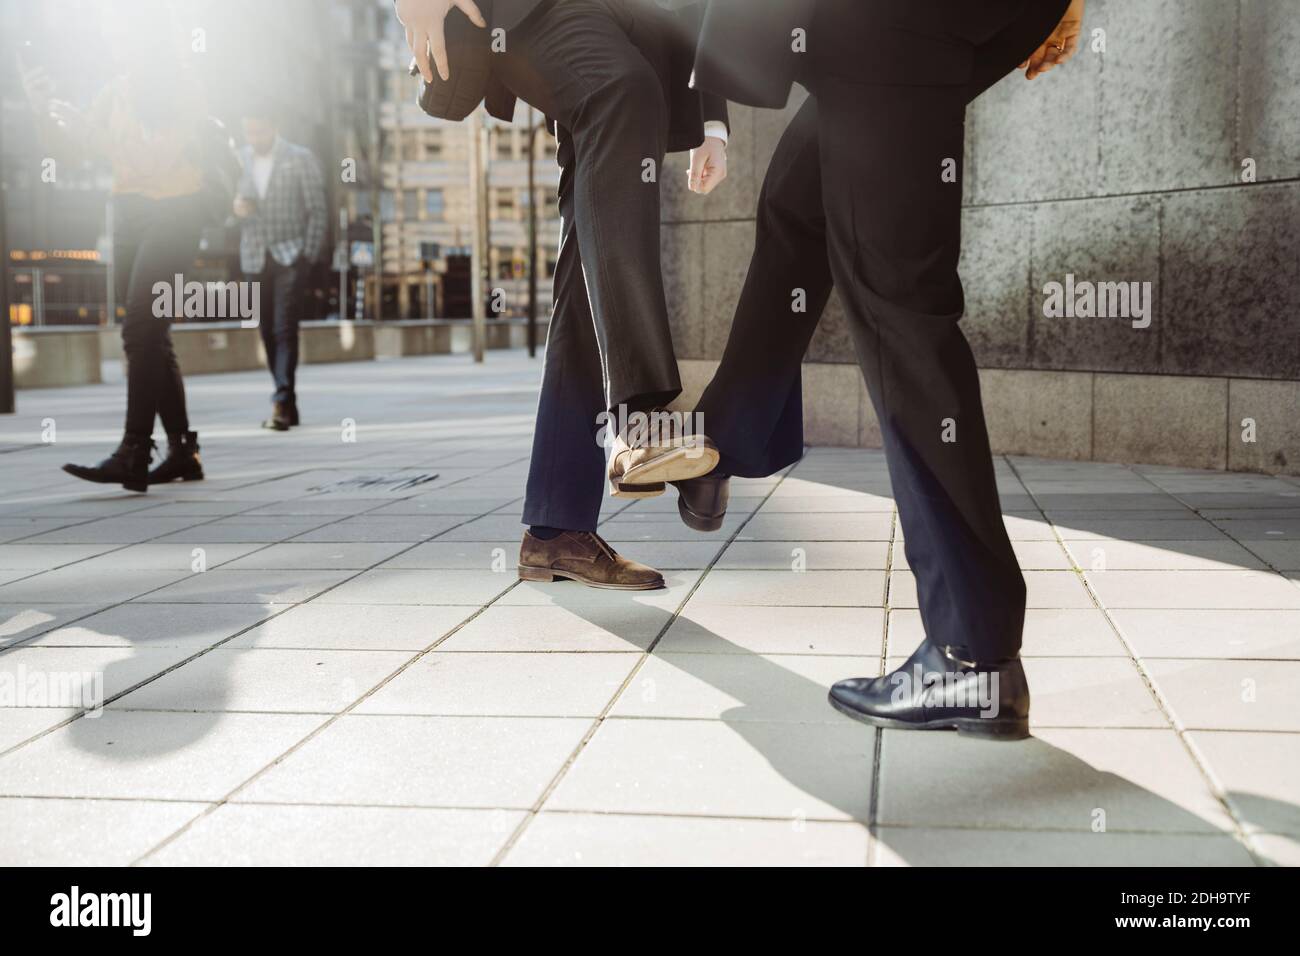 Business people greeting with feet during pandemic Stock Photo